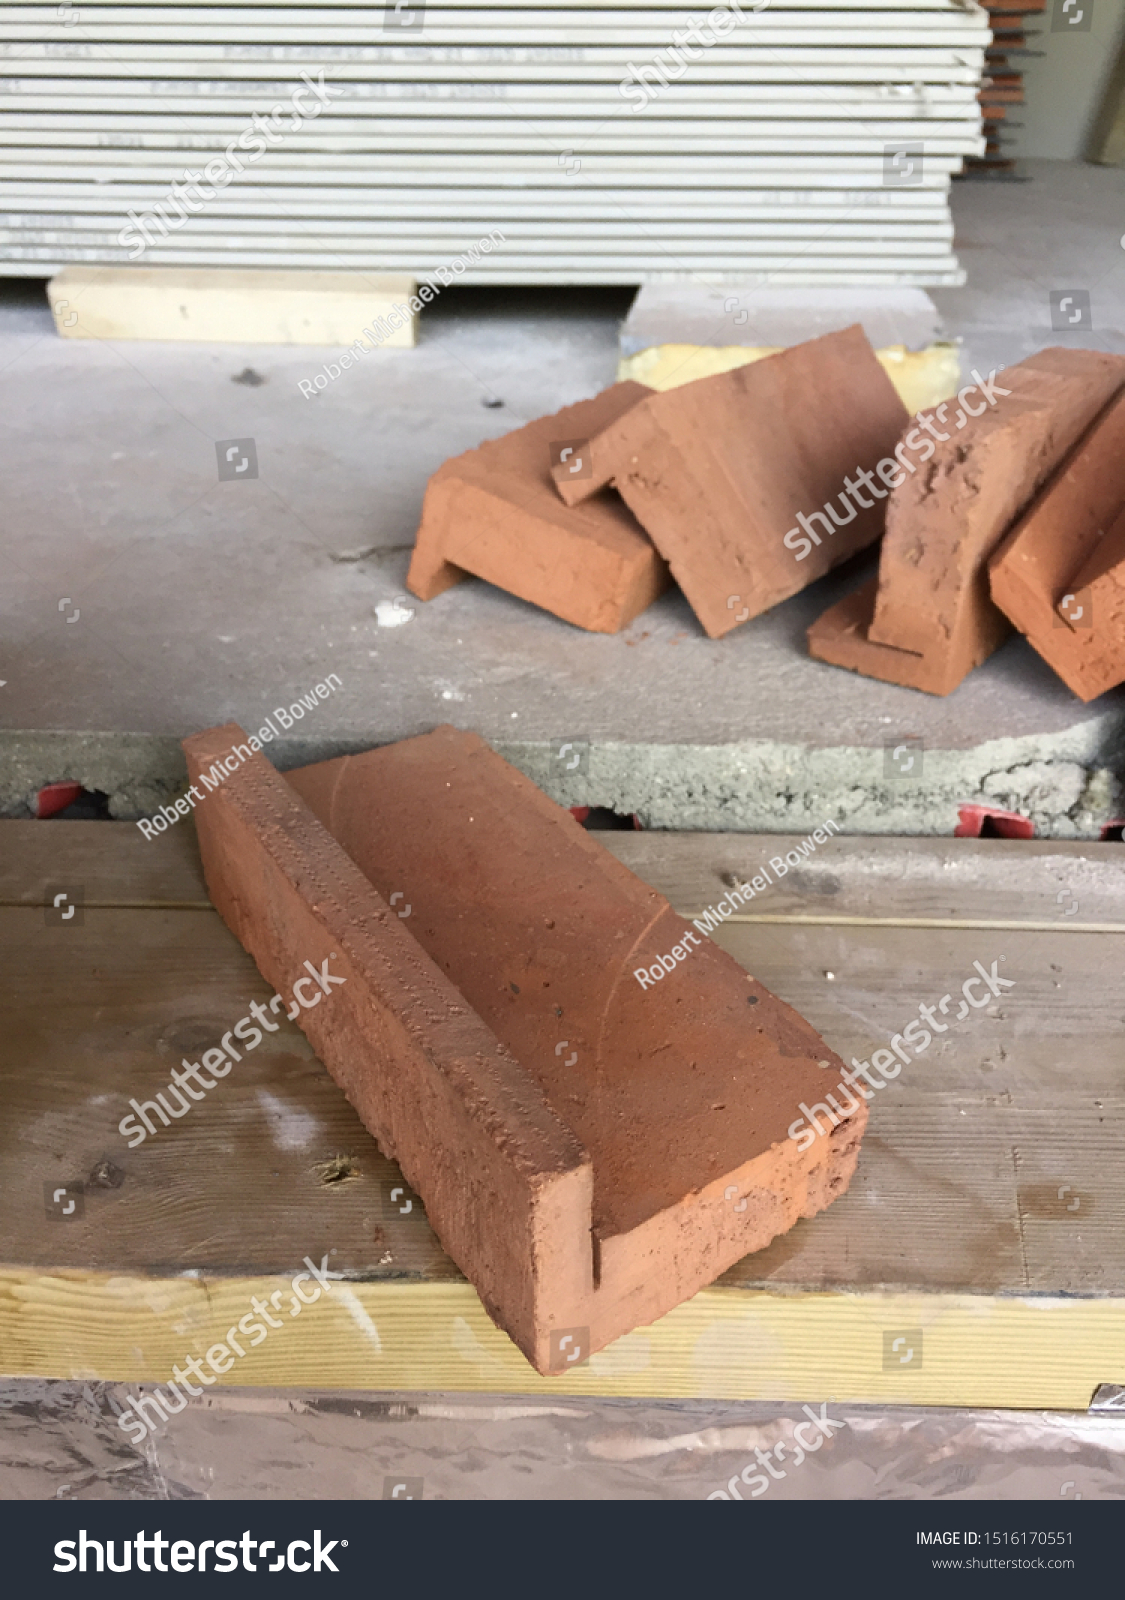 stock-photo-a-close-up-detail-of-a-pistol-brick-with-a-few-more-in-the-background-1516170551.jpg